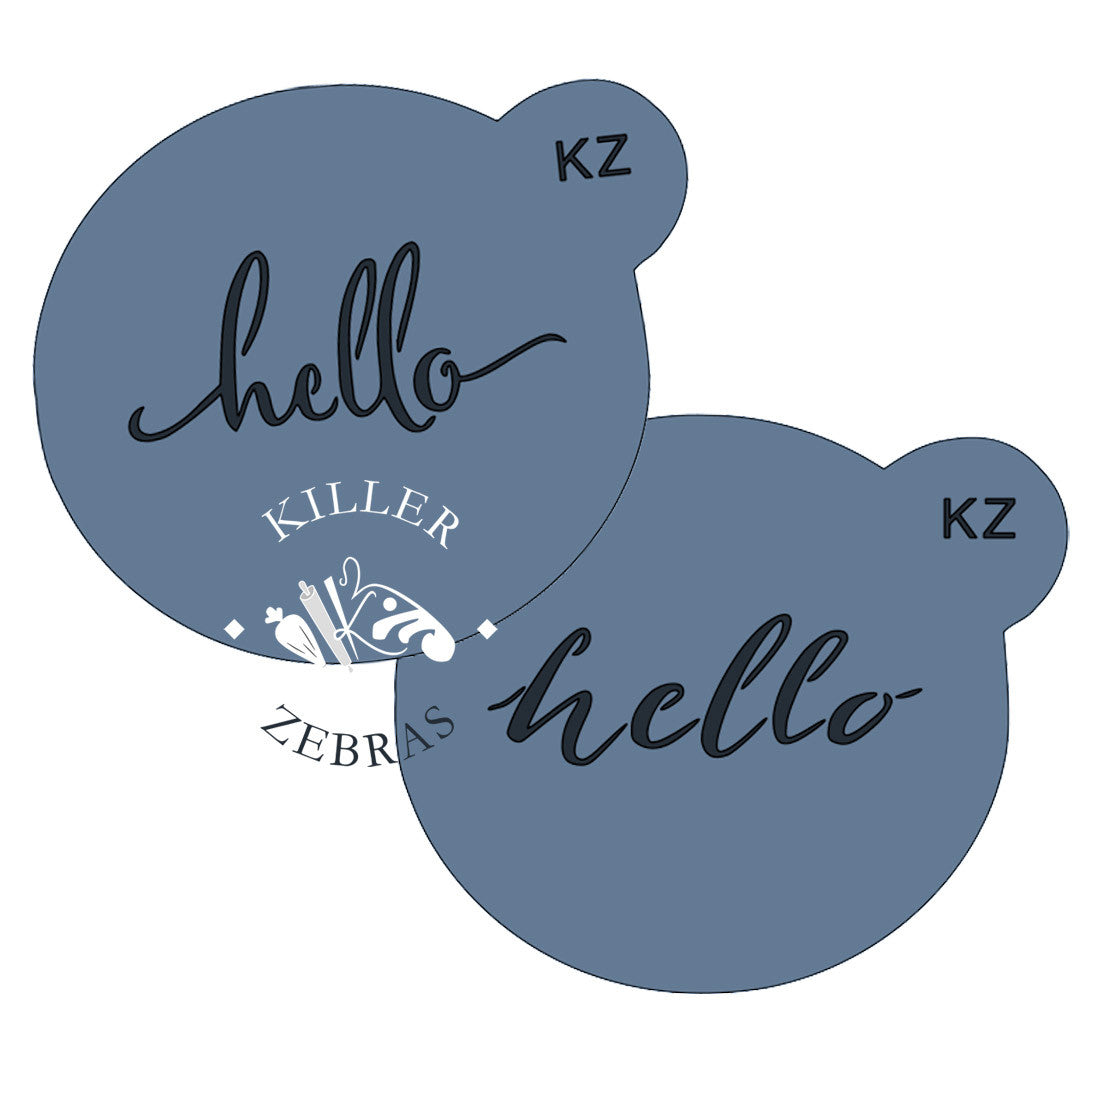 set of small mini cookie stencils that read "hello" in different styles